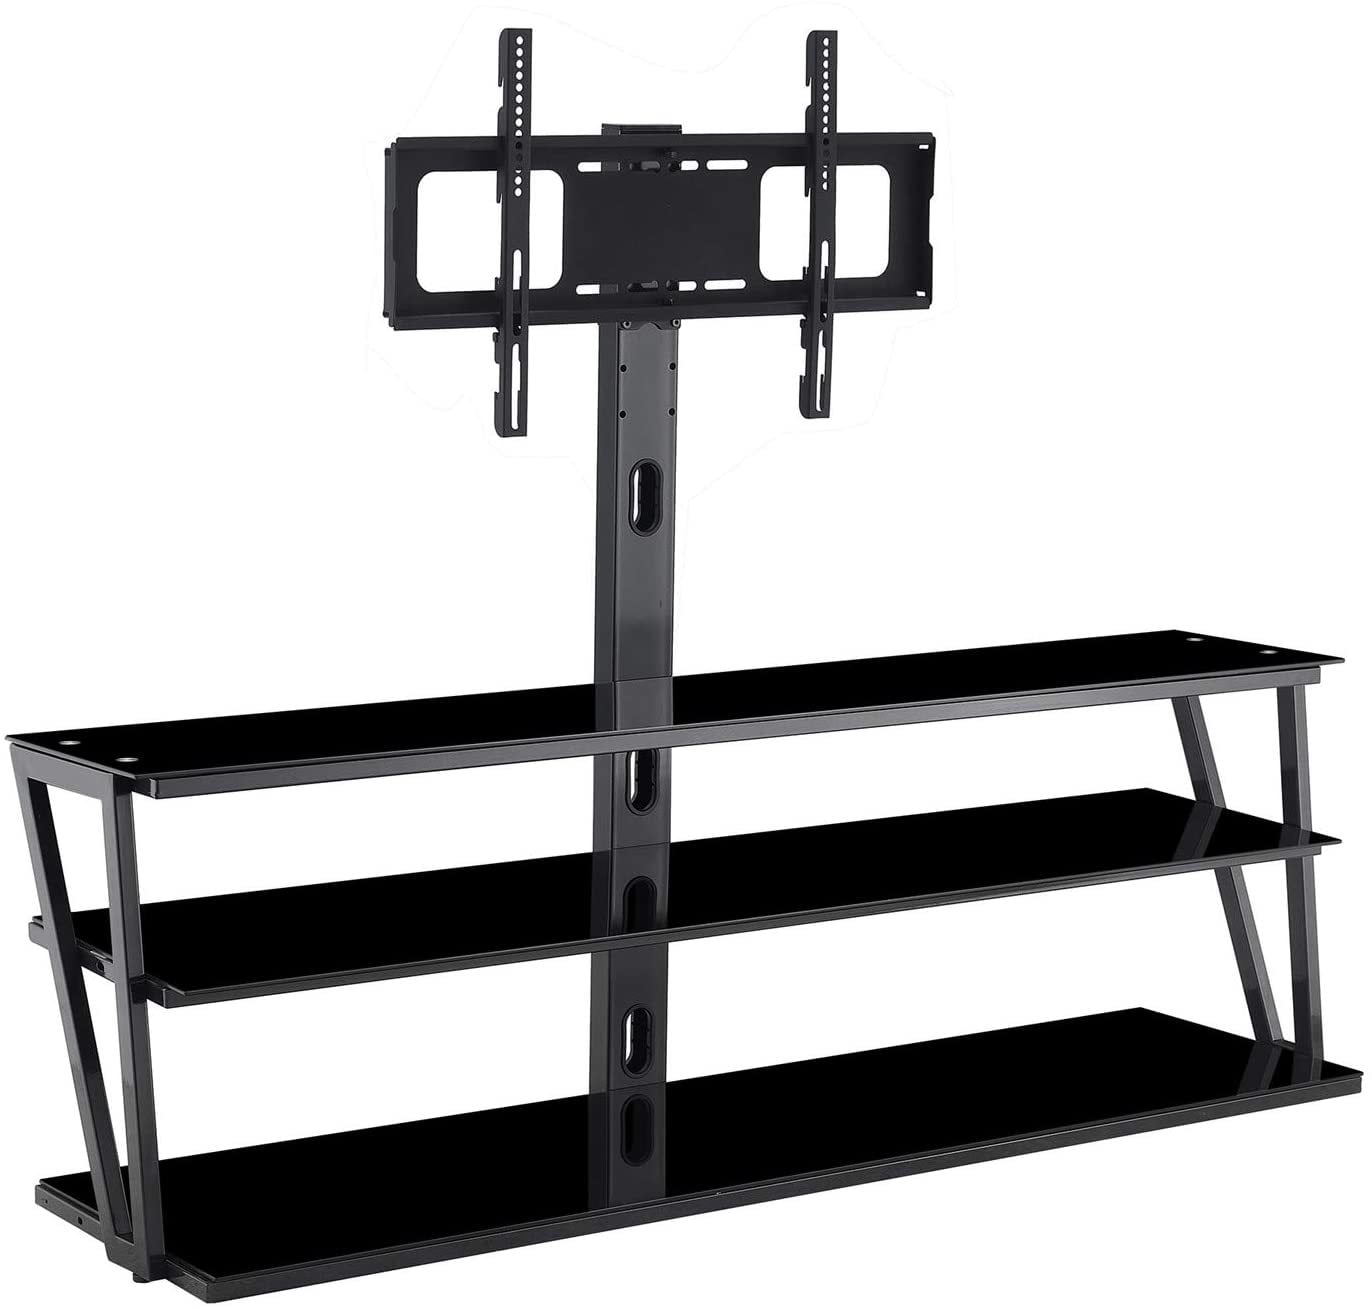 Floor TV Stand TVs, Universal TV Stand for 32-65 Inch ...